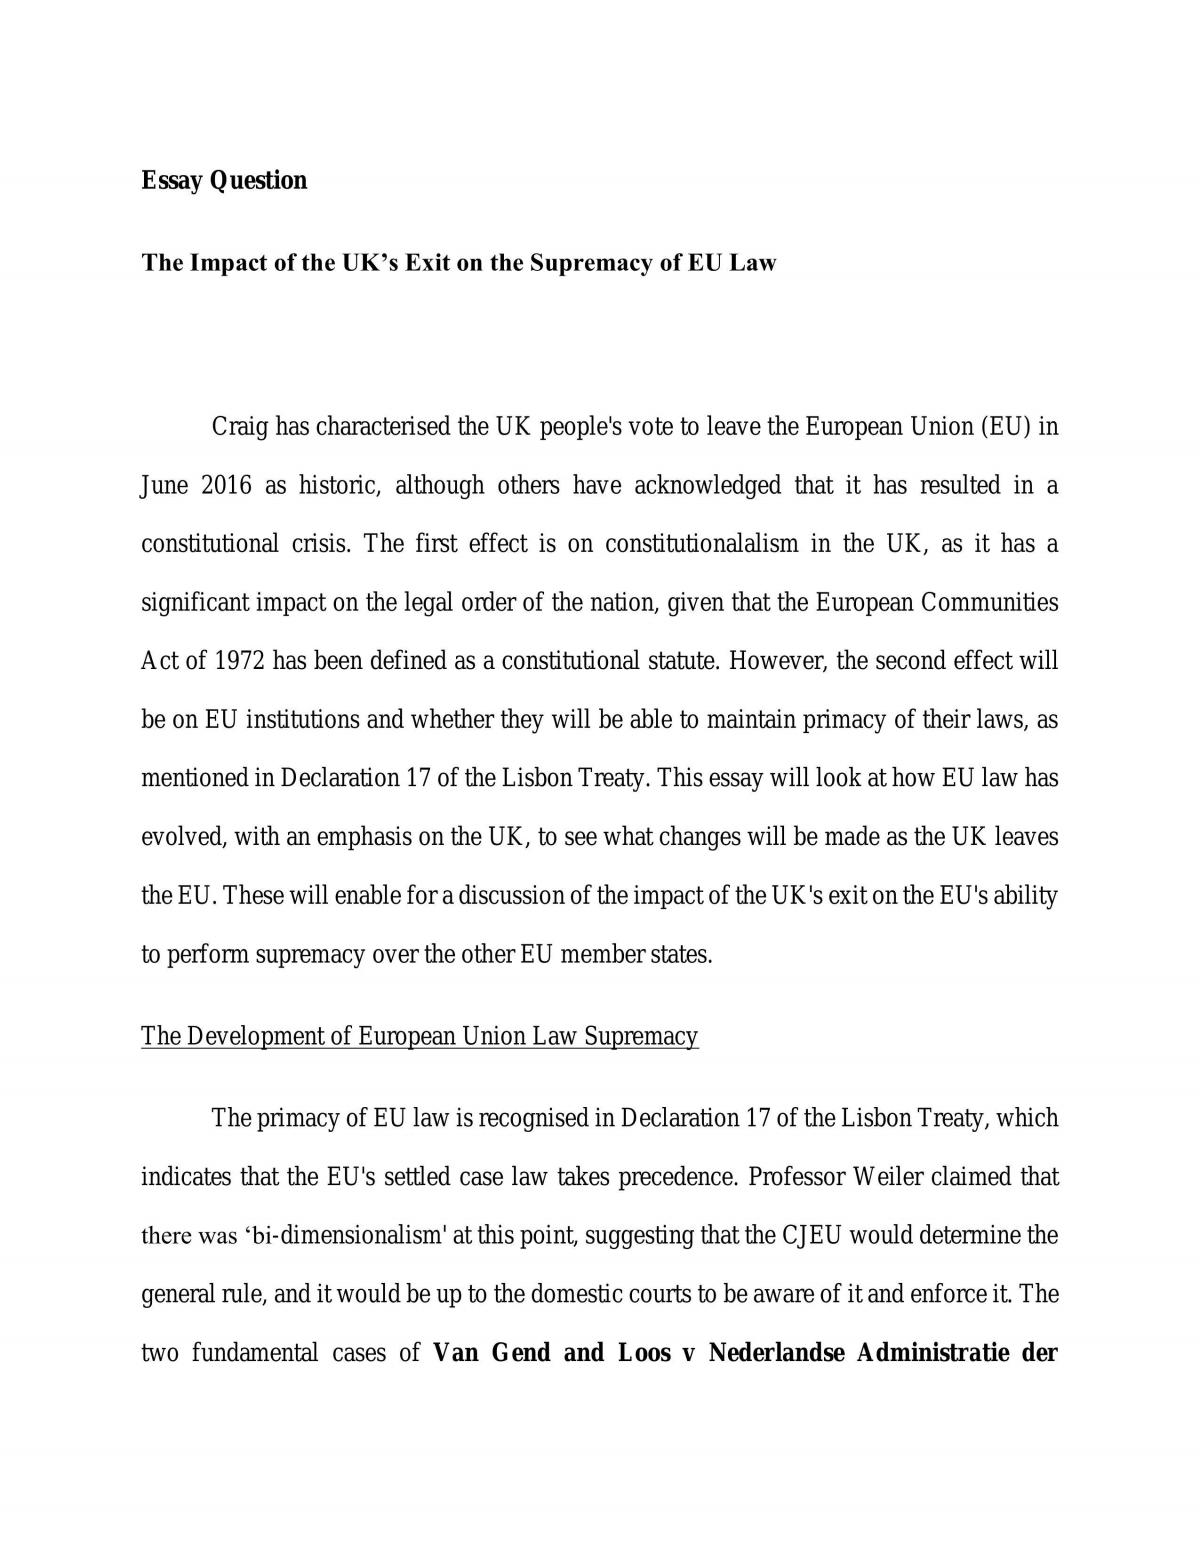 Impact of UK exit on the supremacy of EU Law essay  - Page 1